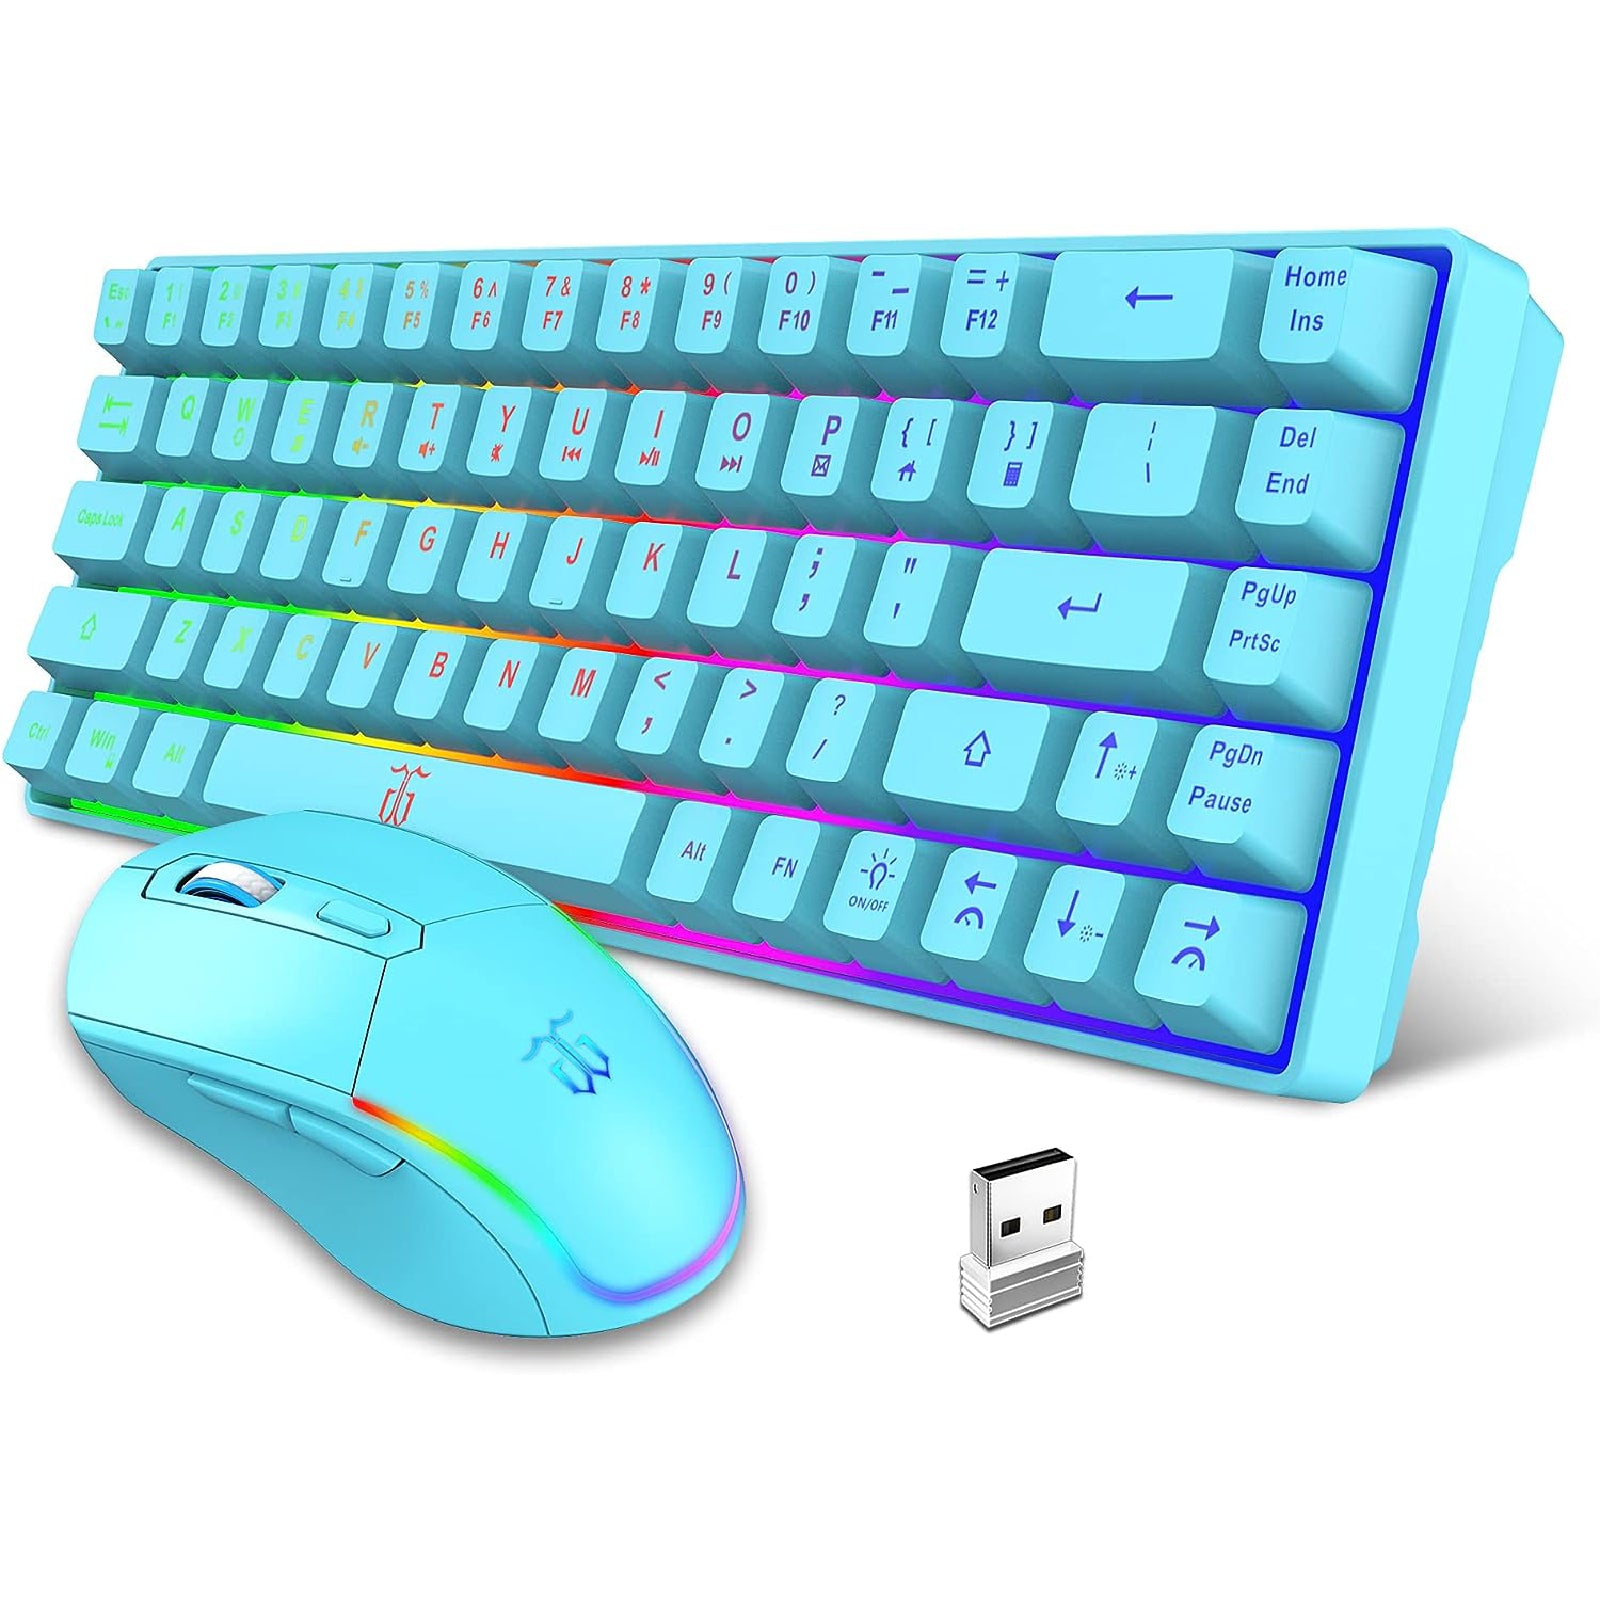 Snpurdiri 60% Blue Wireless Gaming Keyboard and Mouse Combo,LED Backlit Rechargeable 2000mAh Battery